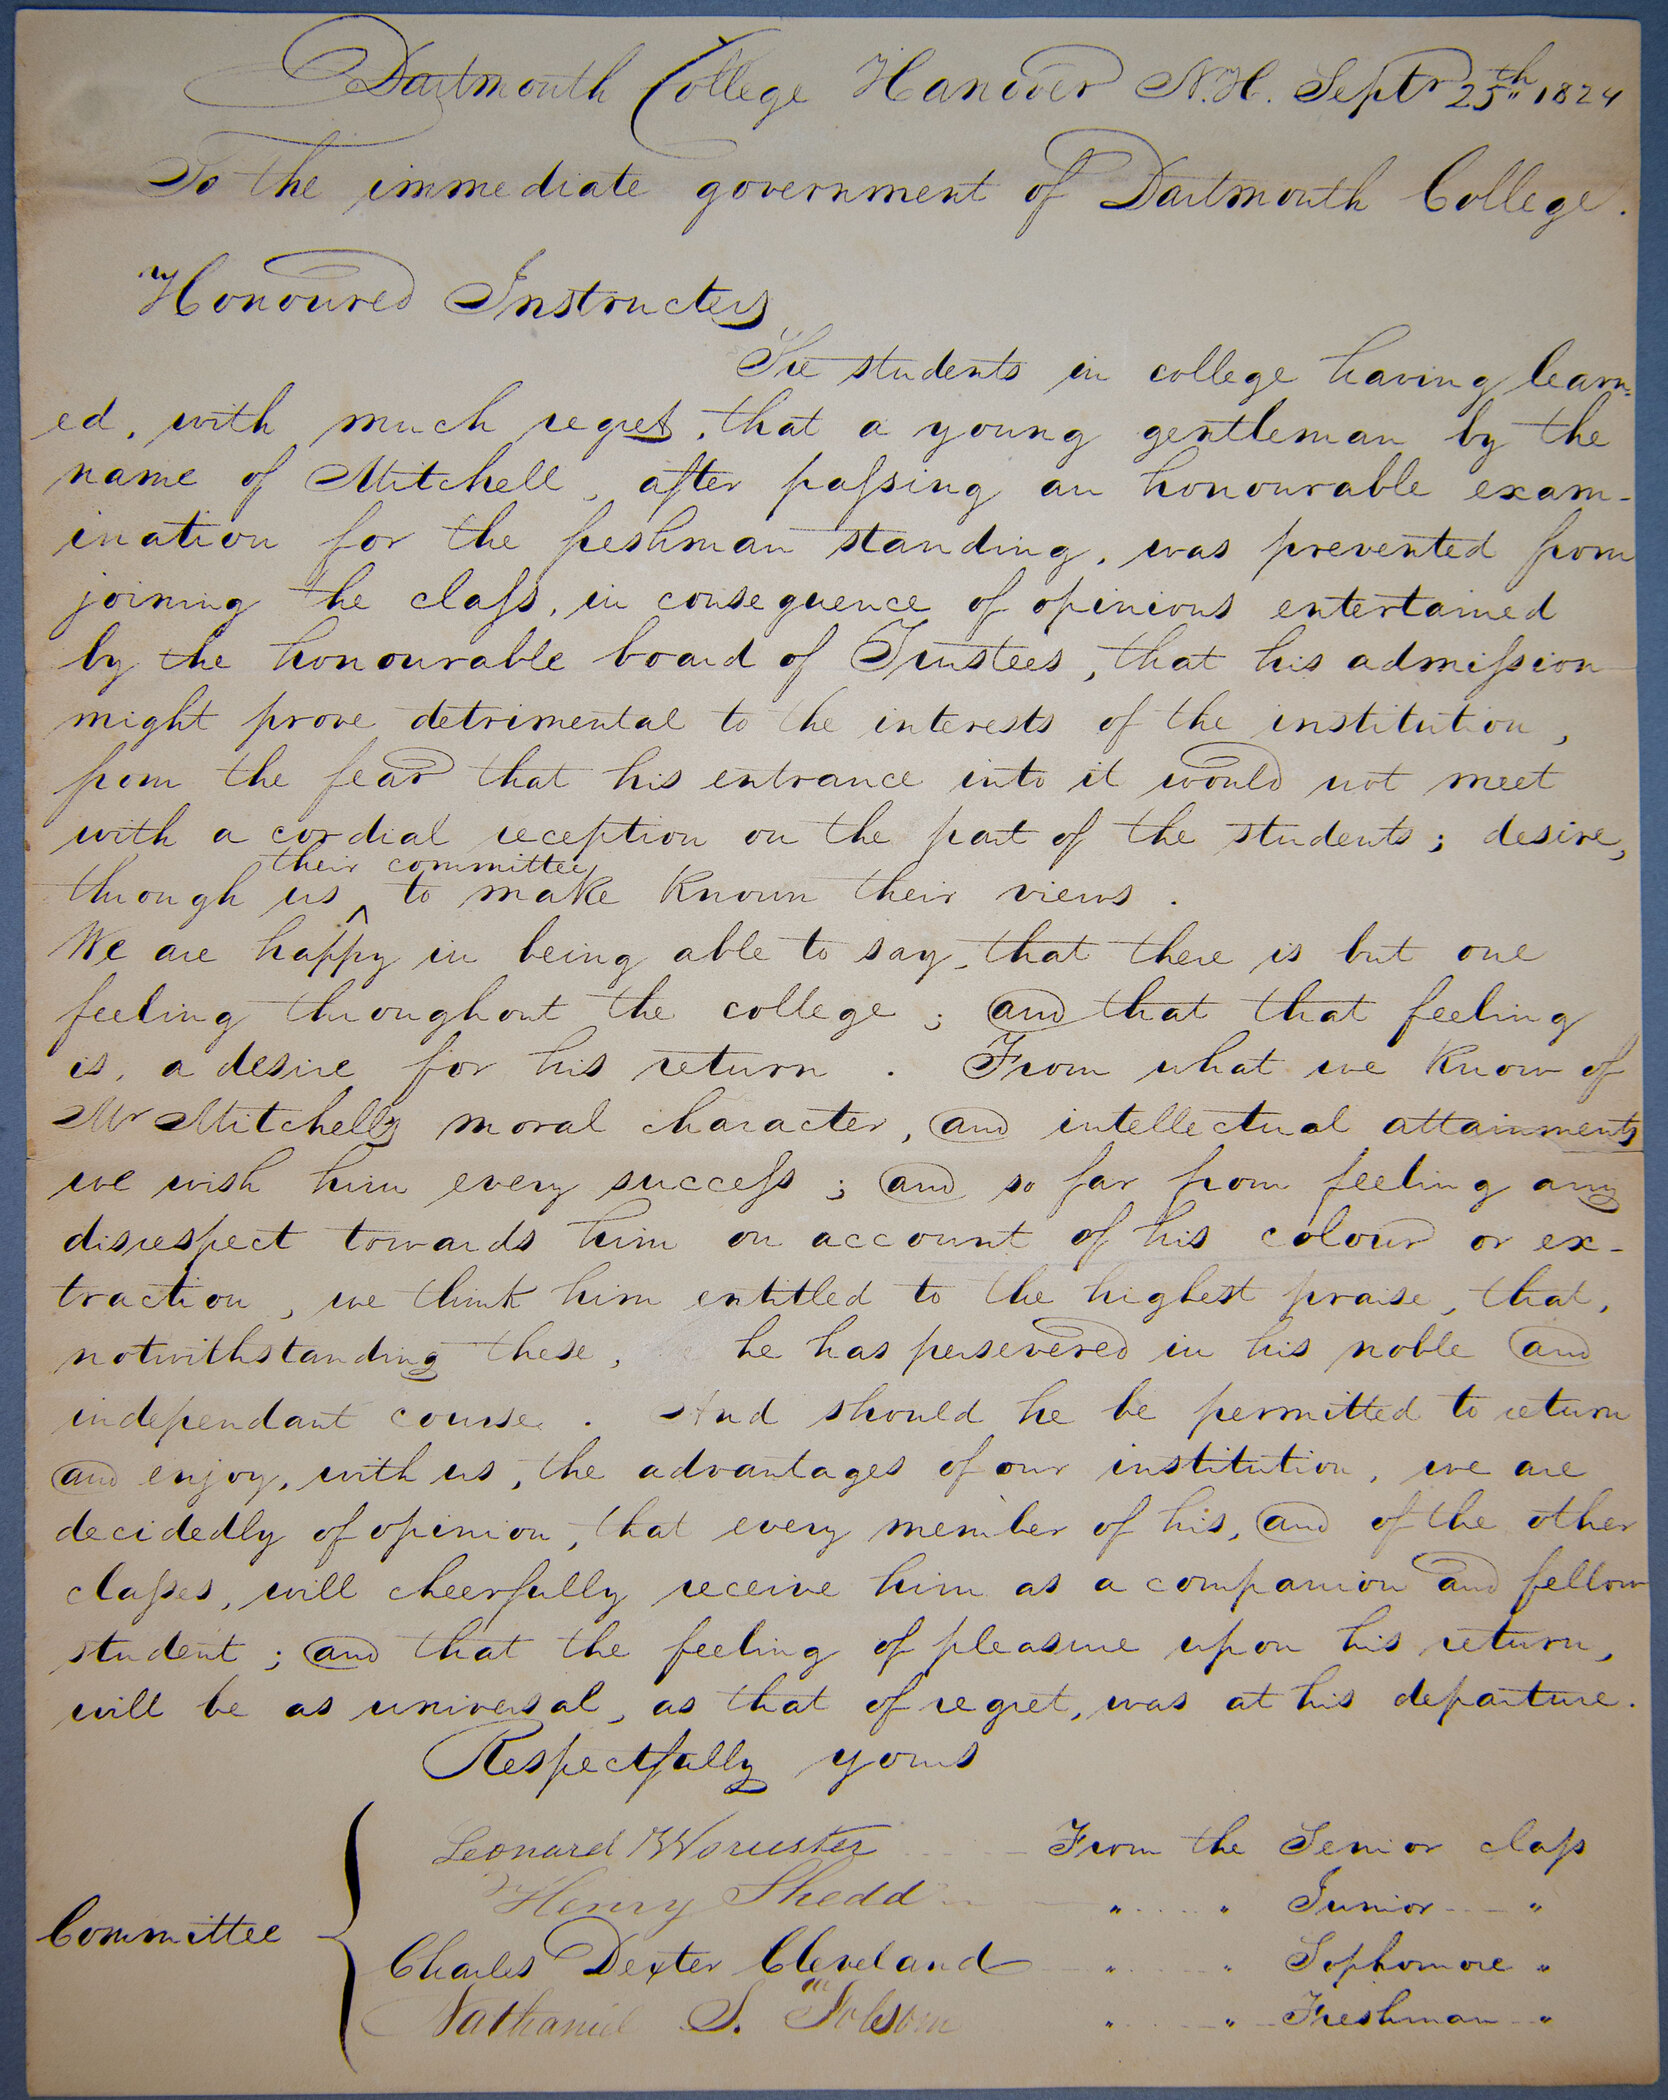 Student petition to the Dartmouth Faculty regarding the rescinded admission of Edward Mitchell, 1824